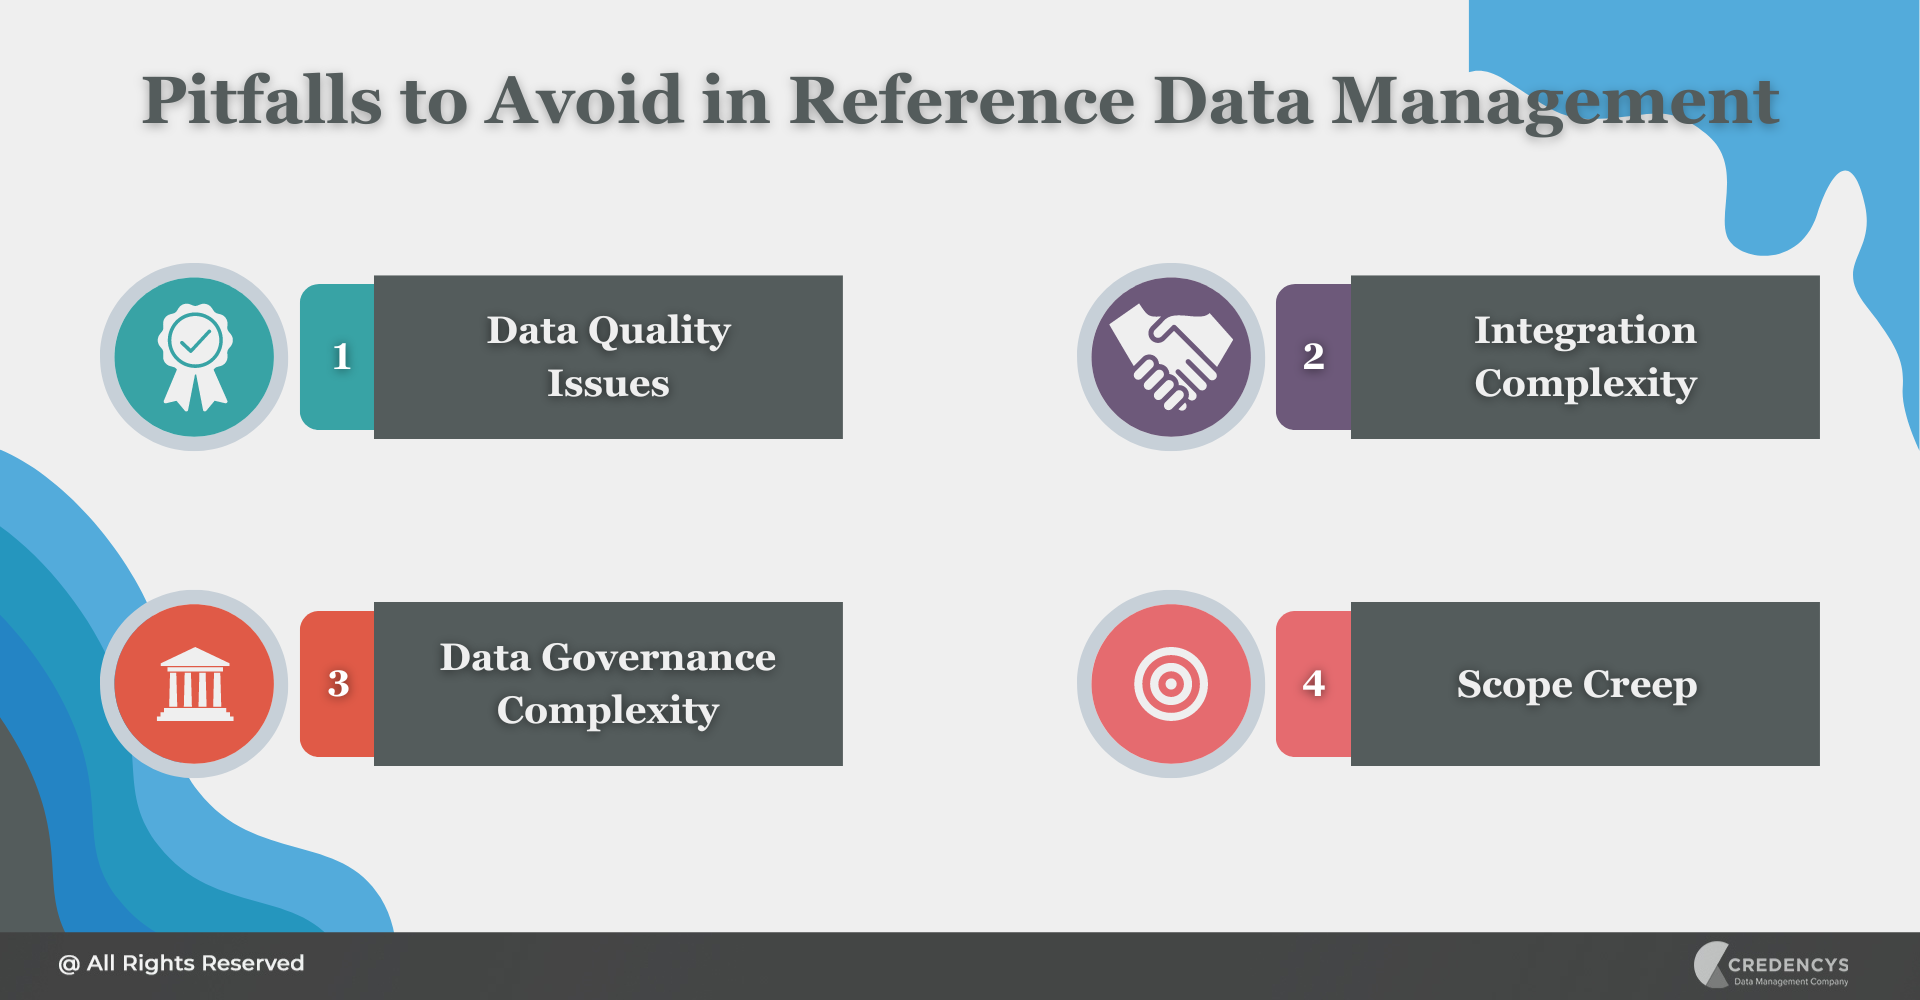 Pitfalls to Avoid in Reference Data Management